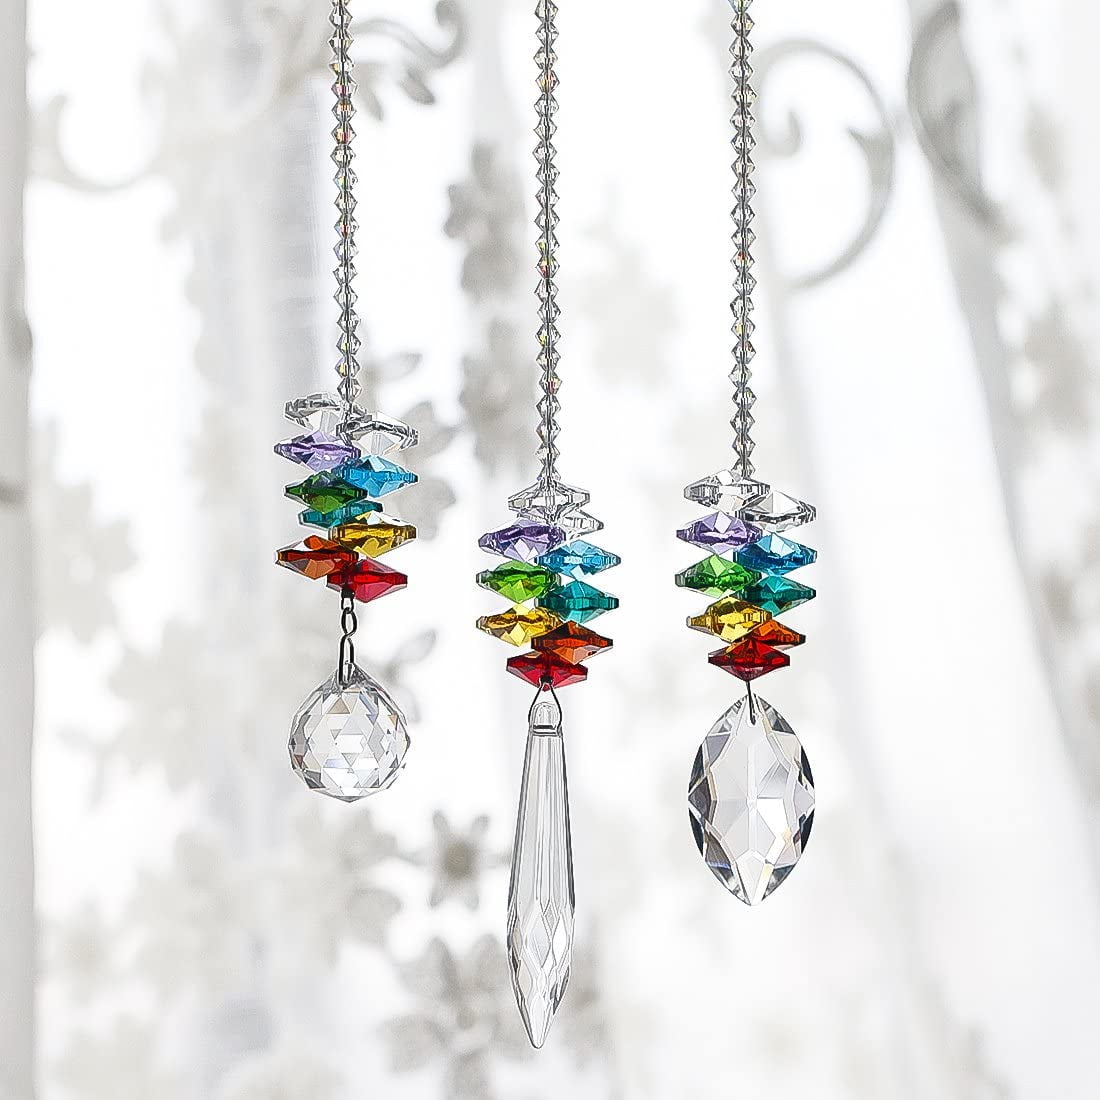 H&D HYALINE & DORA Crystal Multi-Color Crystal Ball Prism Dazzling Crystal  Ceiling Fan Pull Chains (Set of 6-20mm) 